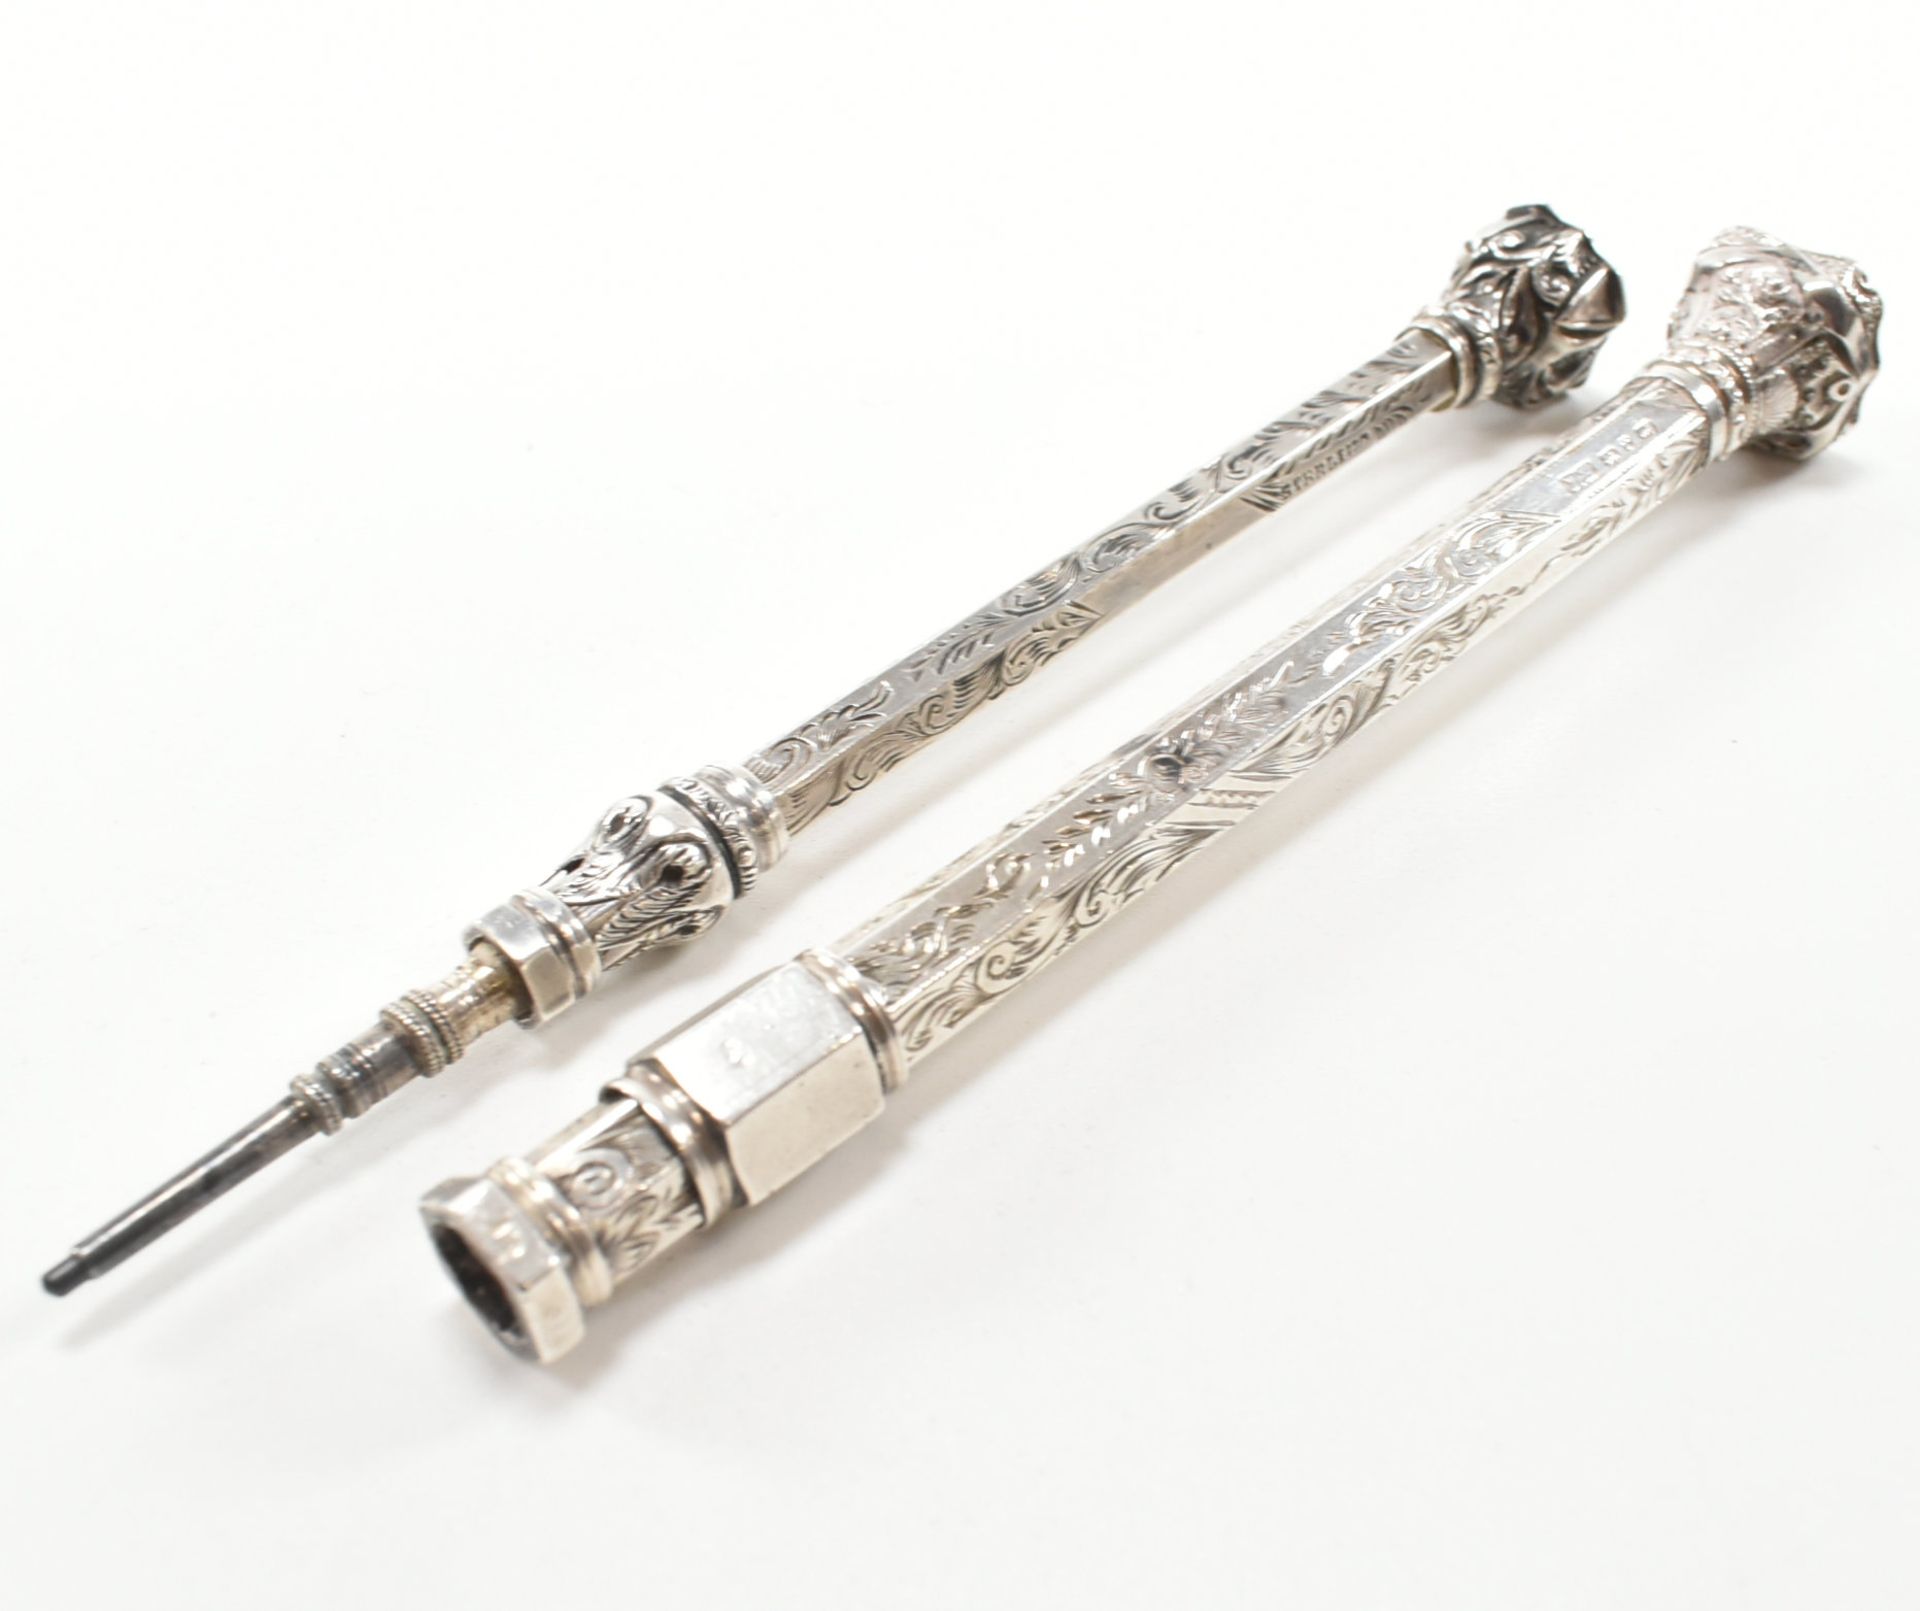 TWO SILVER PROPELLING PENCILS WITH BLOODSTONE SEALS - Image 7 of 10